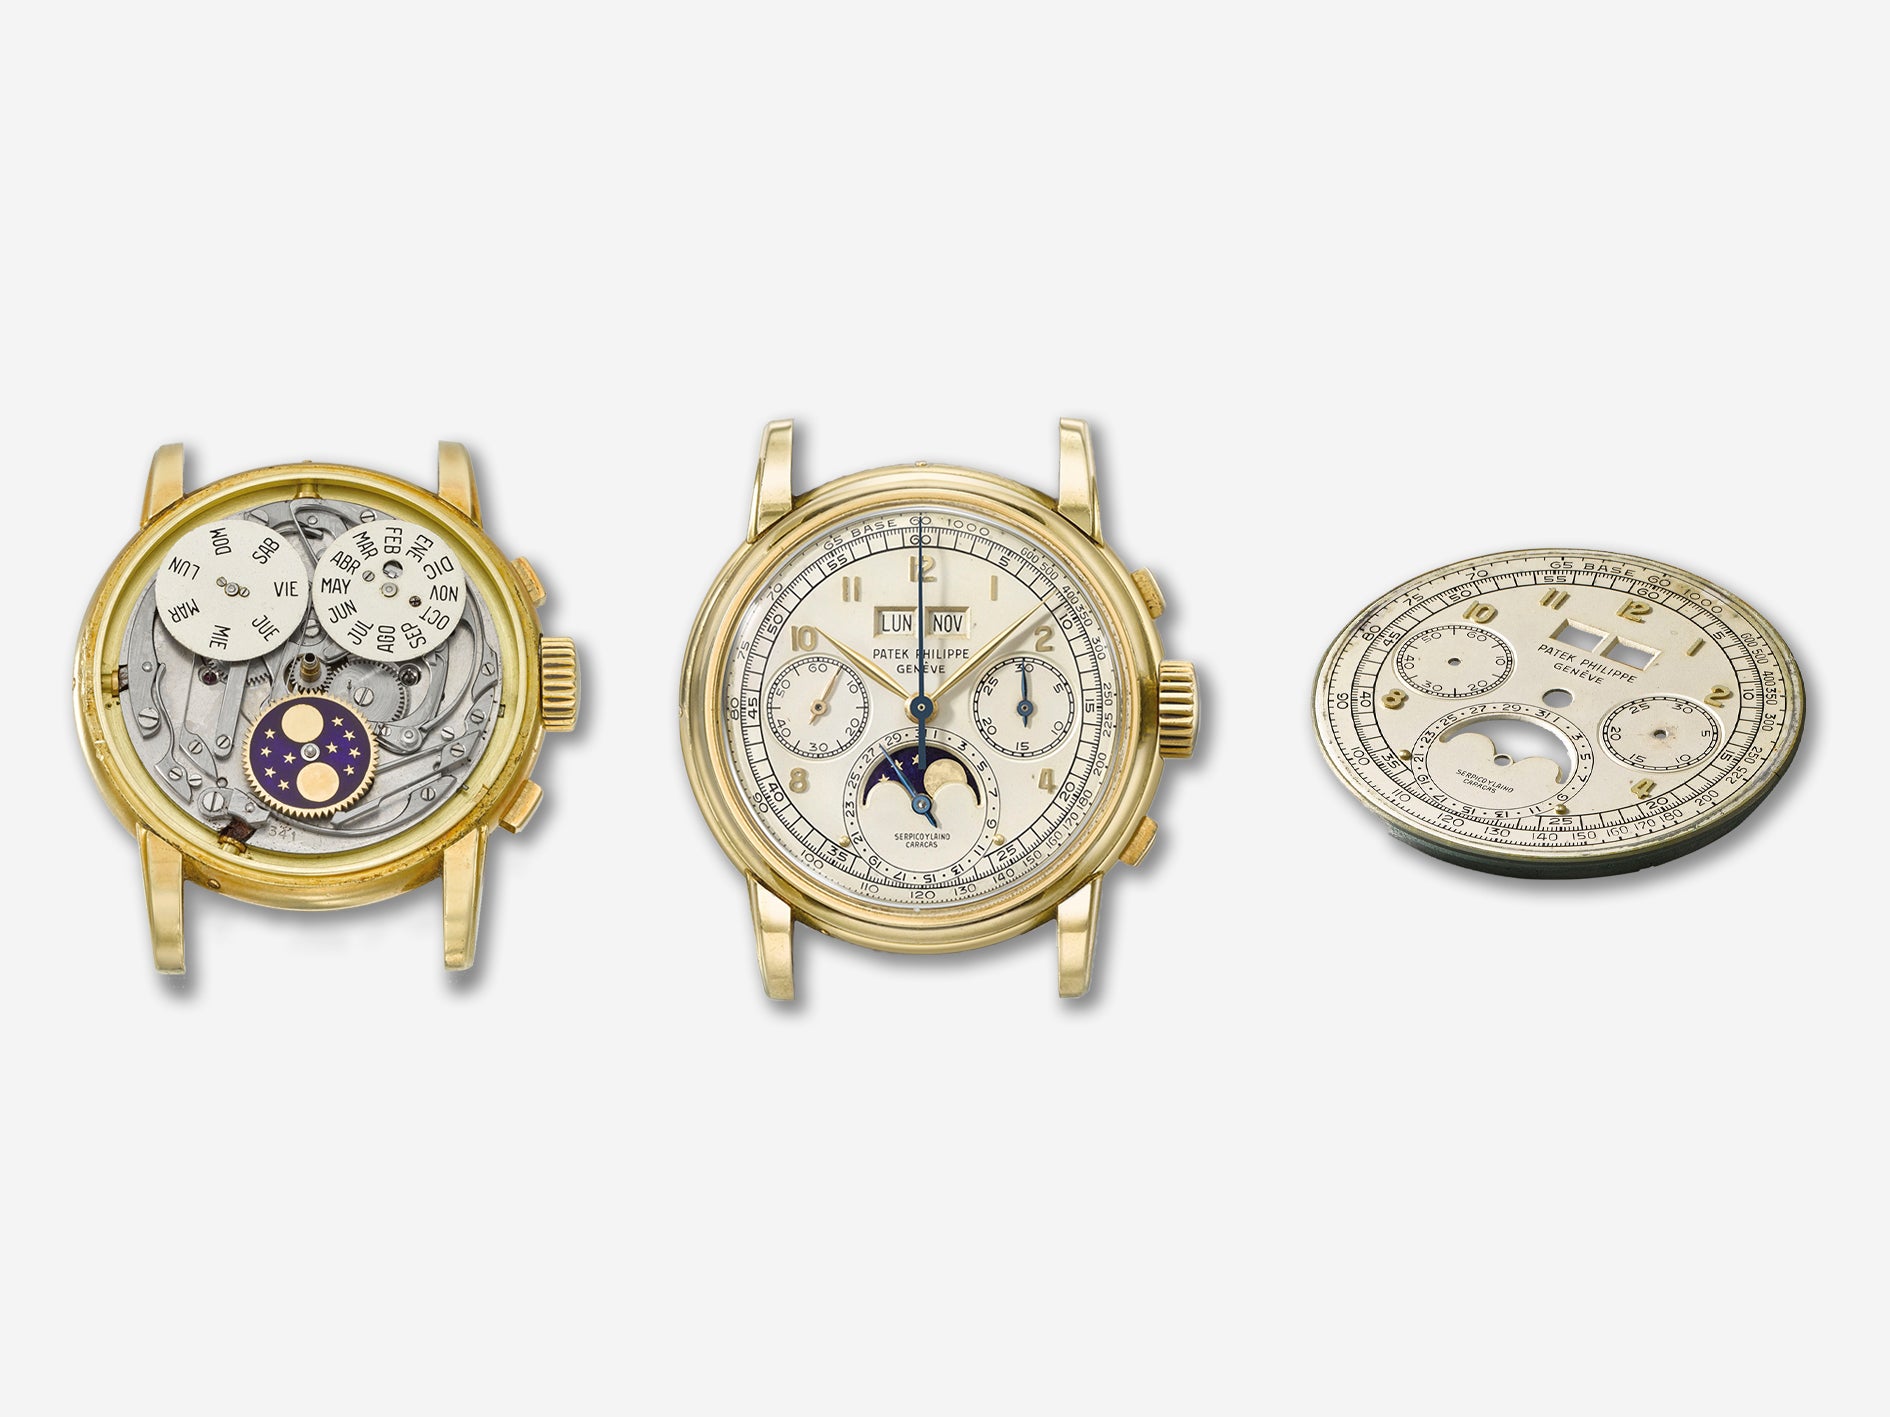 The Most Expensive Watches Sold by Christie's in 2018